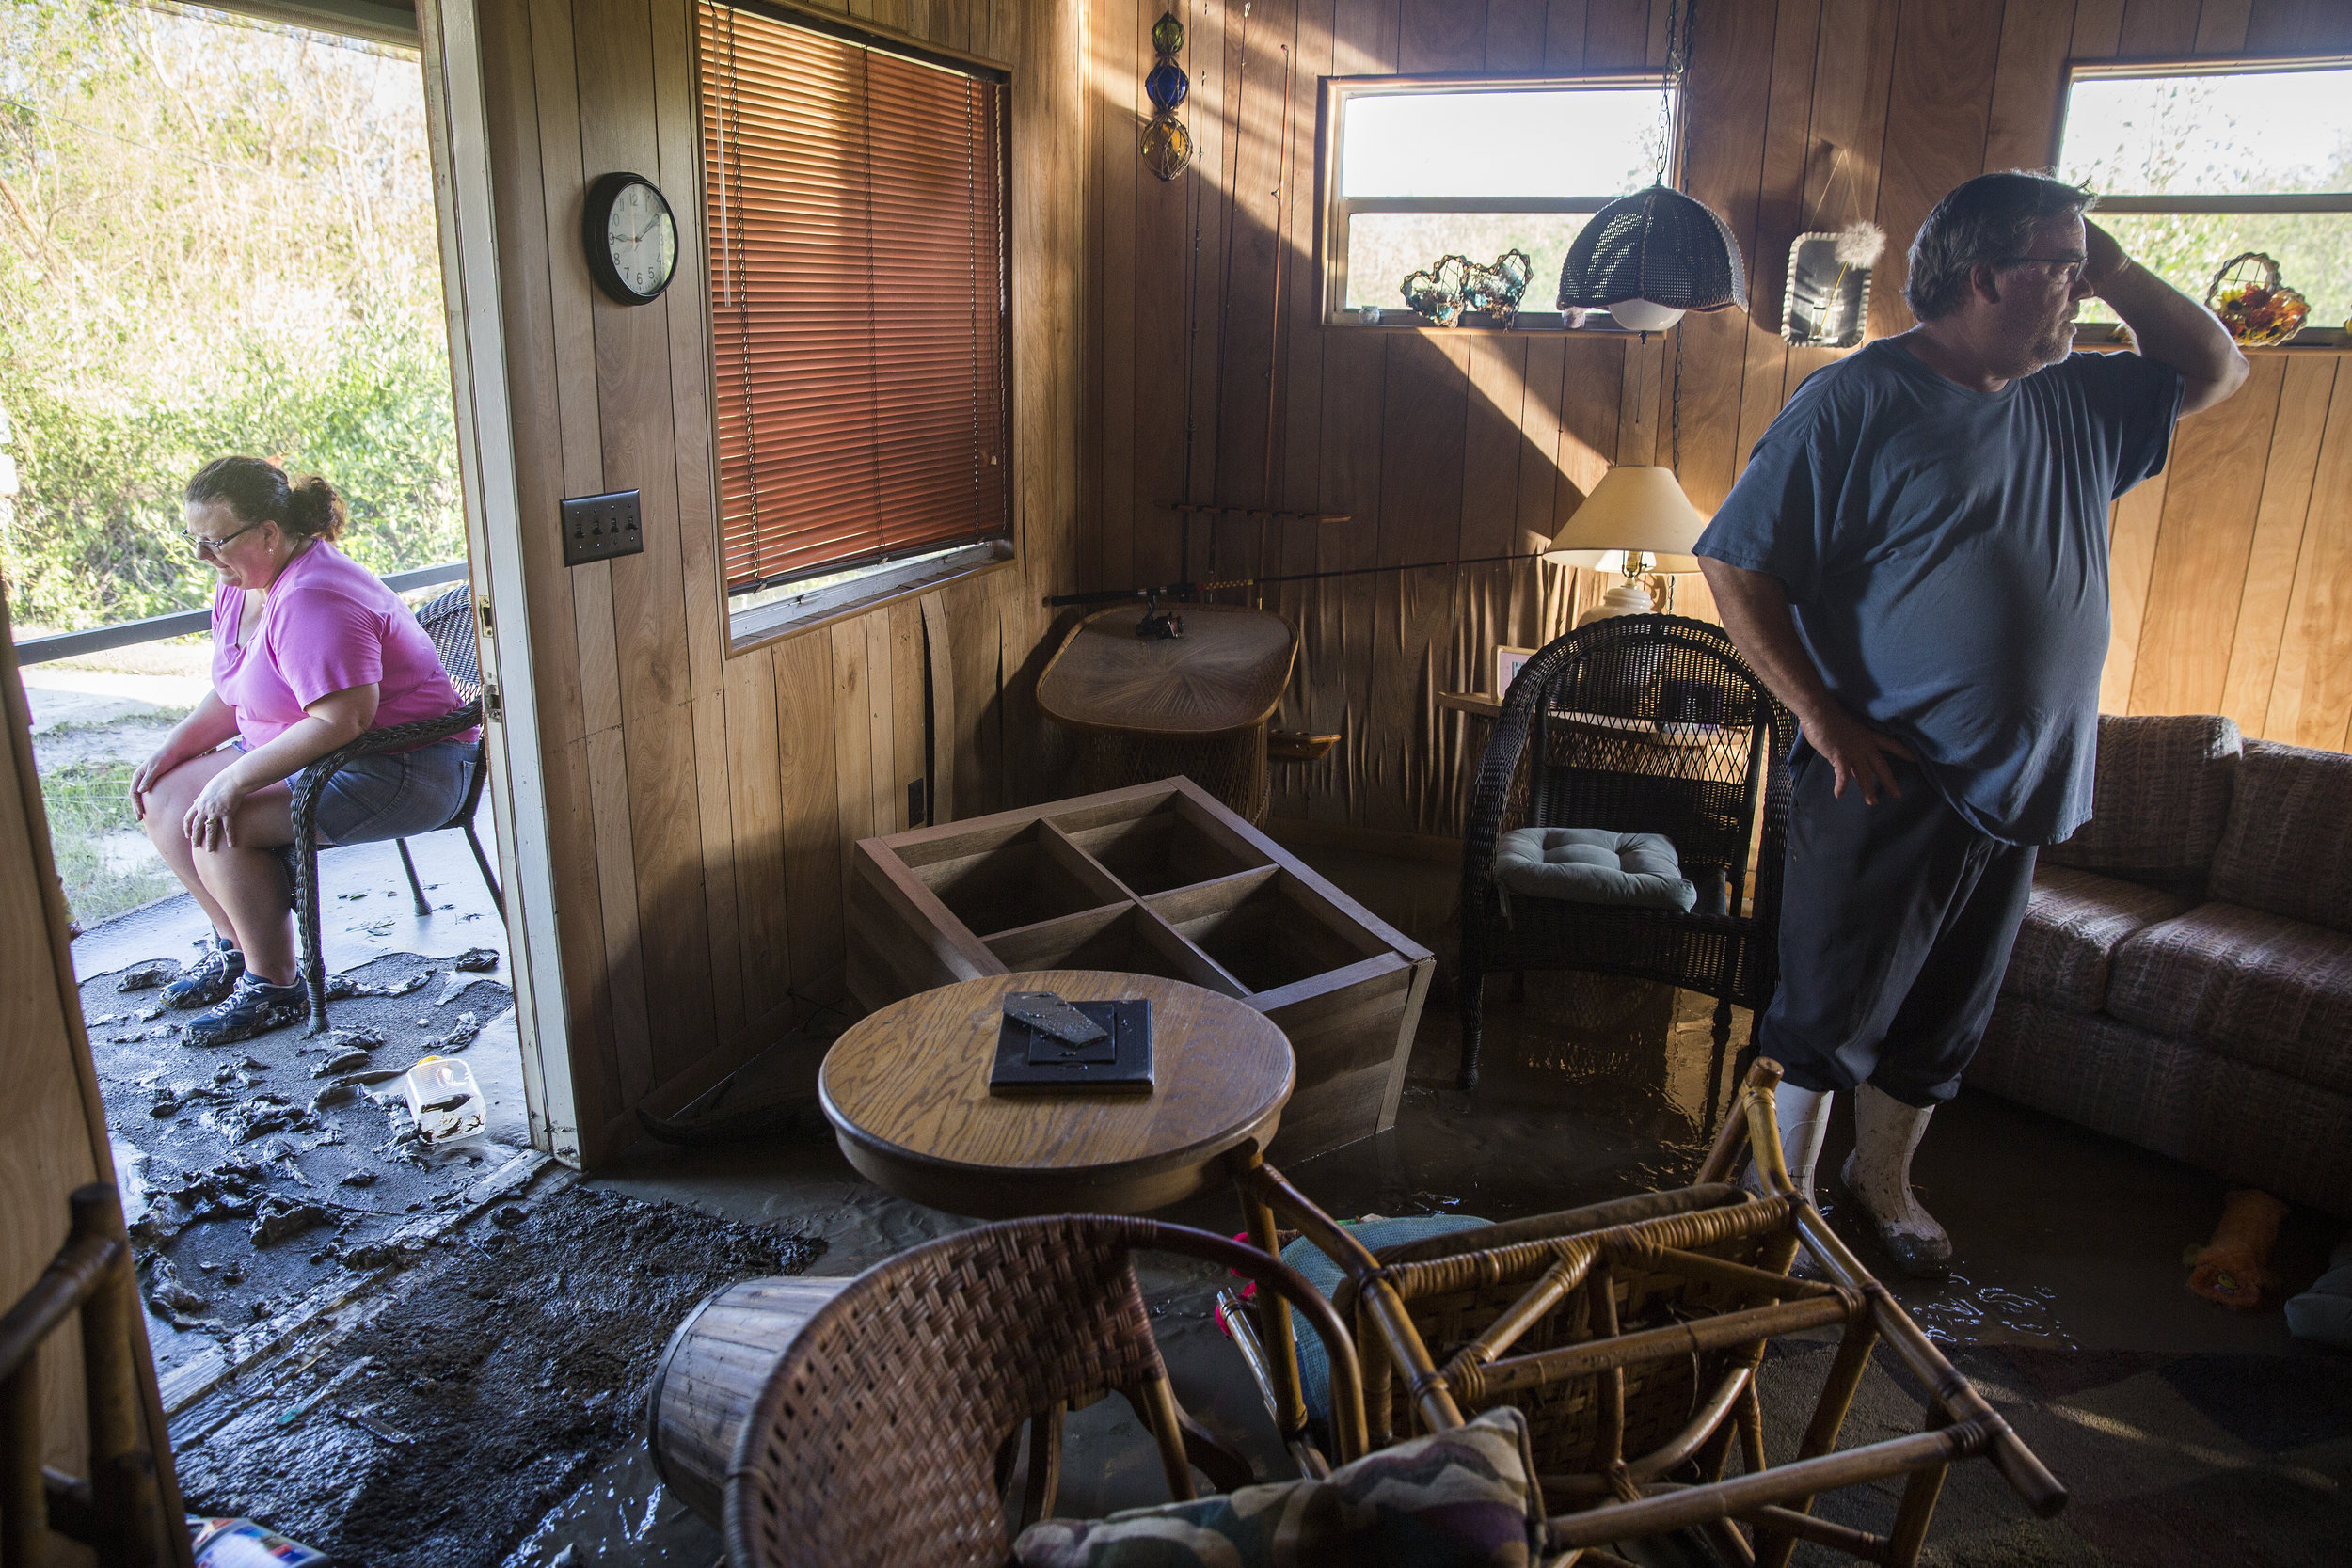  Robert Howard, right, and his wife Kathleen returned to their weekend home to find their furniture scrambled and the floor covered in a thick layer of mud in Plantation Island, an unincorporated area nearby Everglades City, as Collier County began p